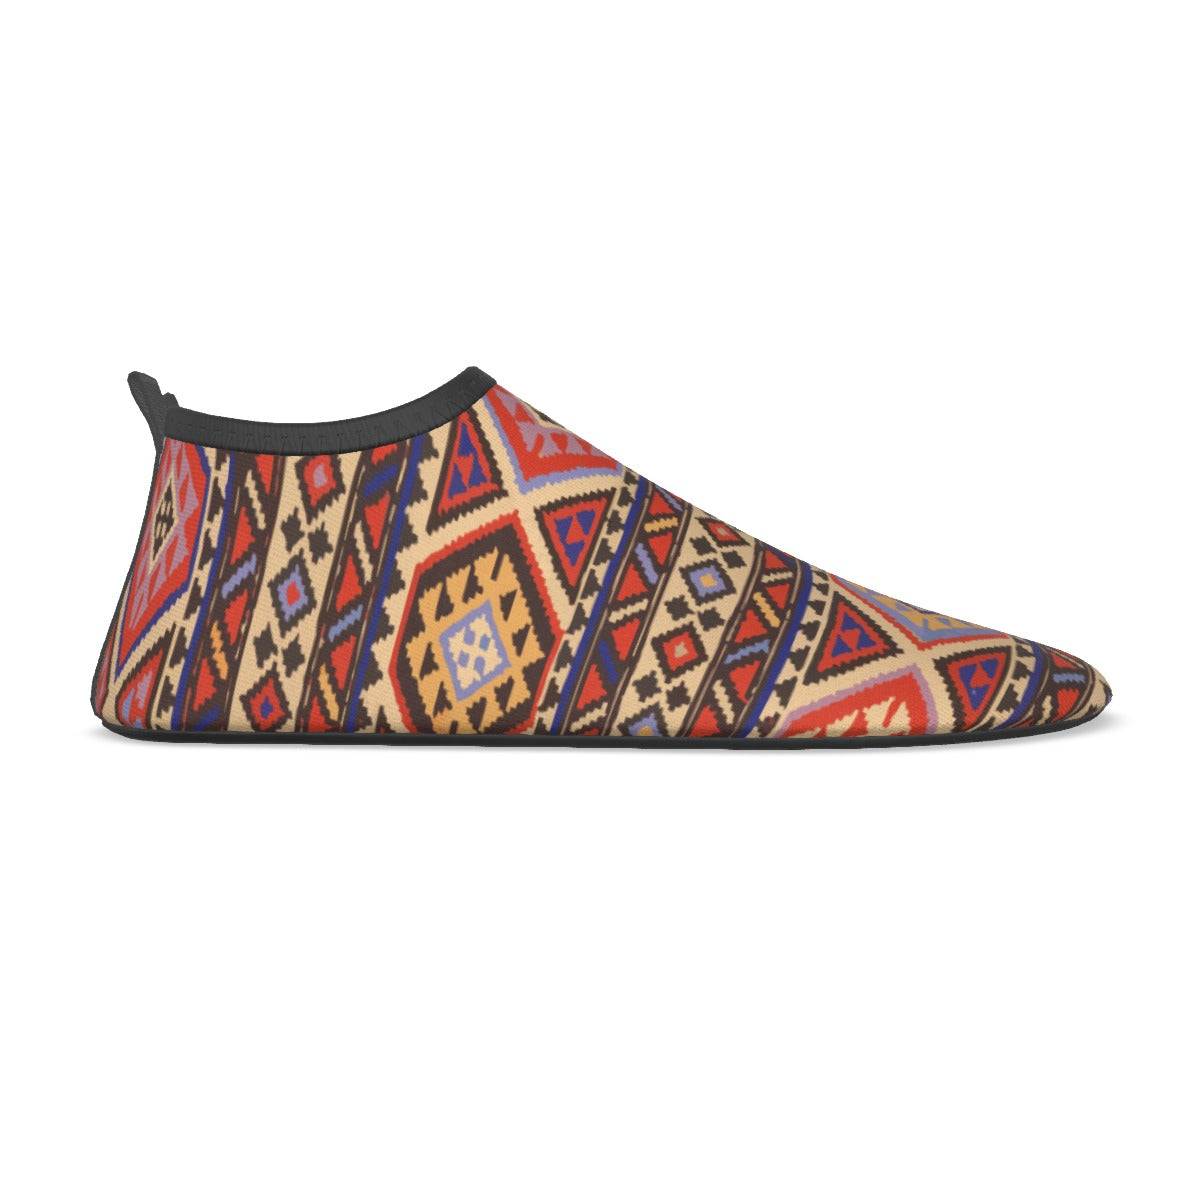 Yoga Shoes - Meditation Mediterranean Pattern  - Ala Elden Style - Personal Hour for Yoga and Meditations 